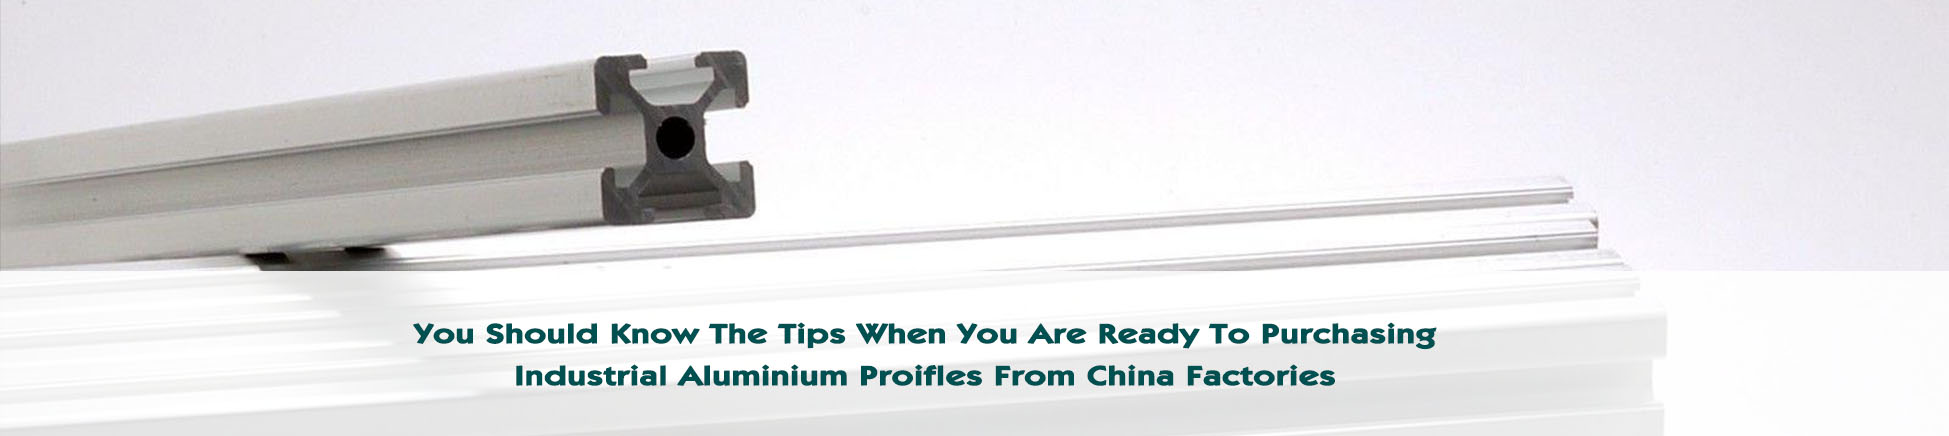 the-tips-about-industrial-aluminum-profile